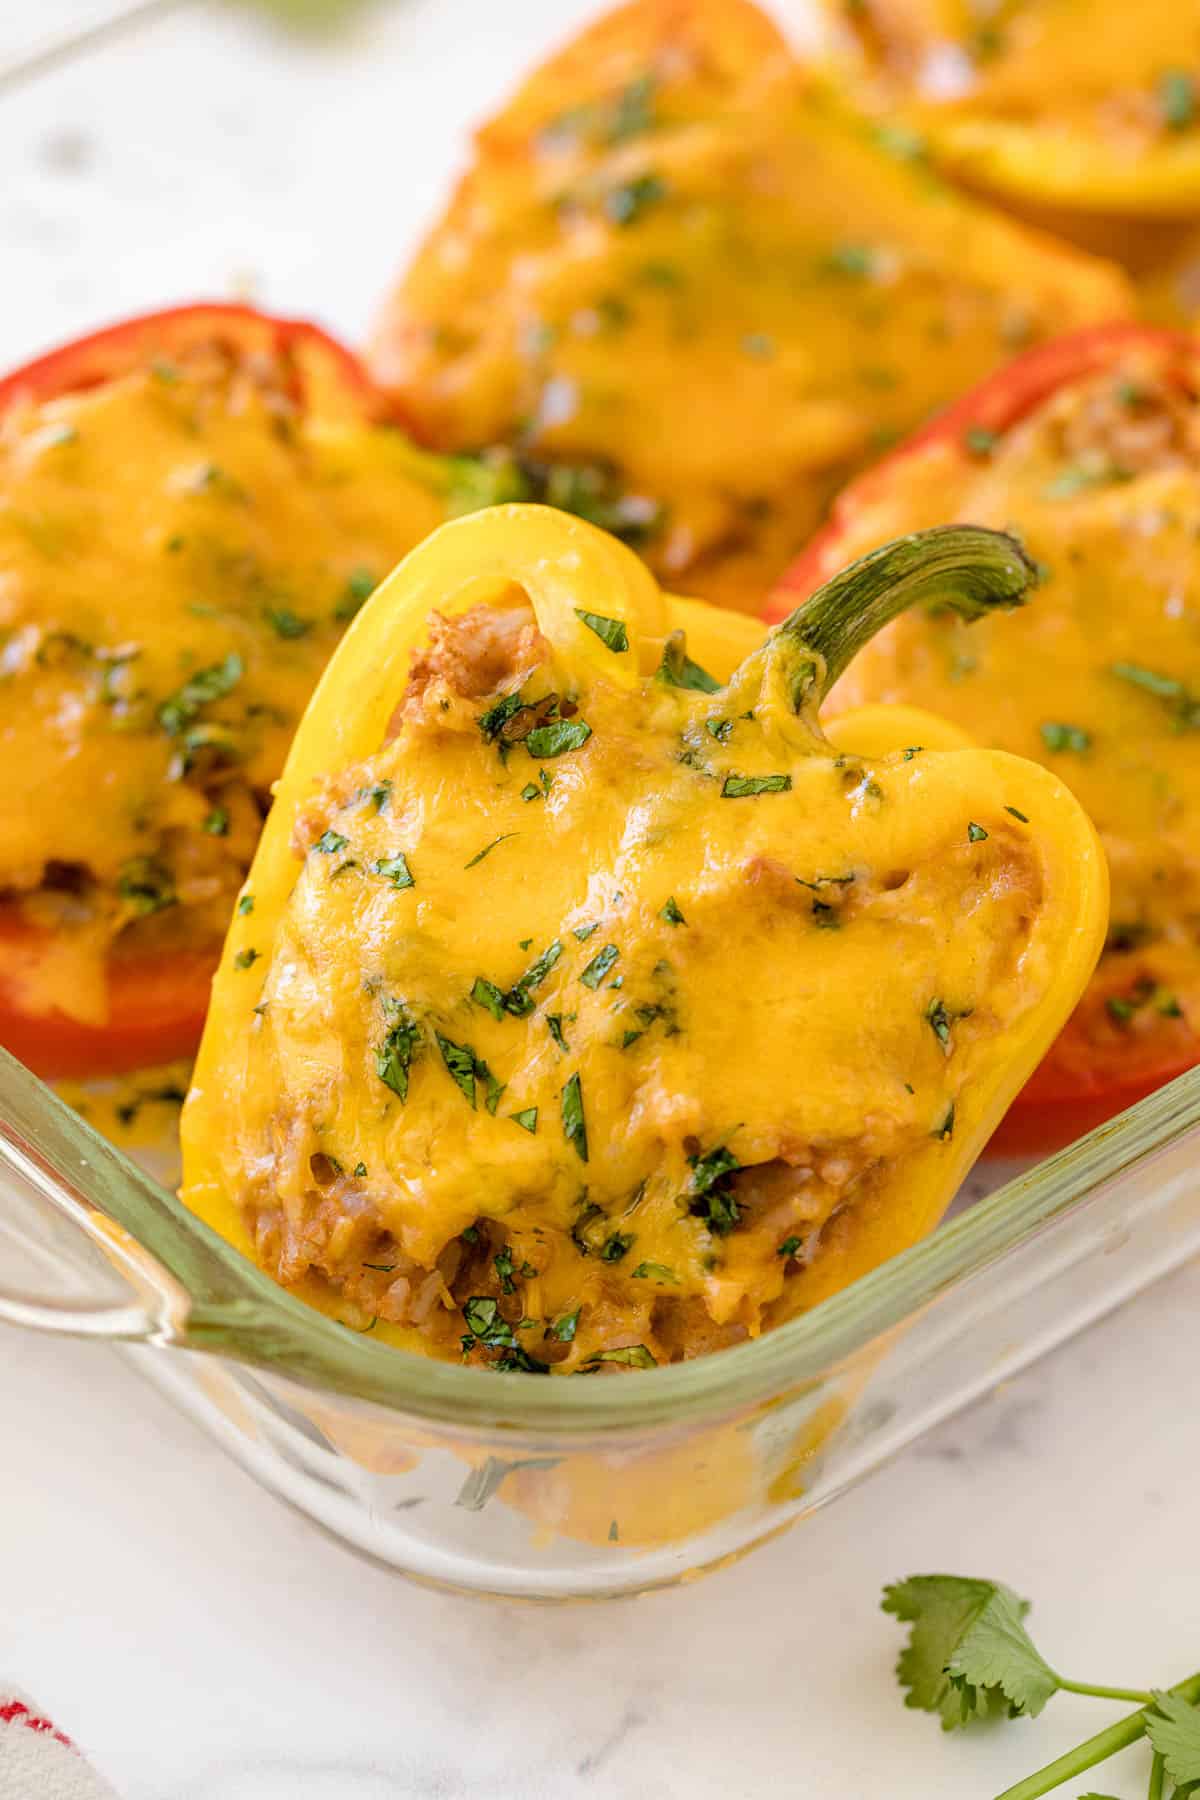 Mexican stuffed peppers in a casserole dish.